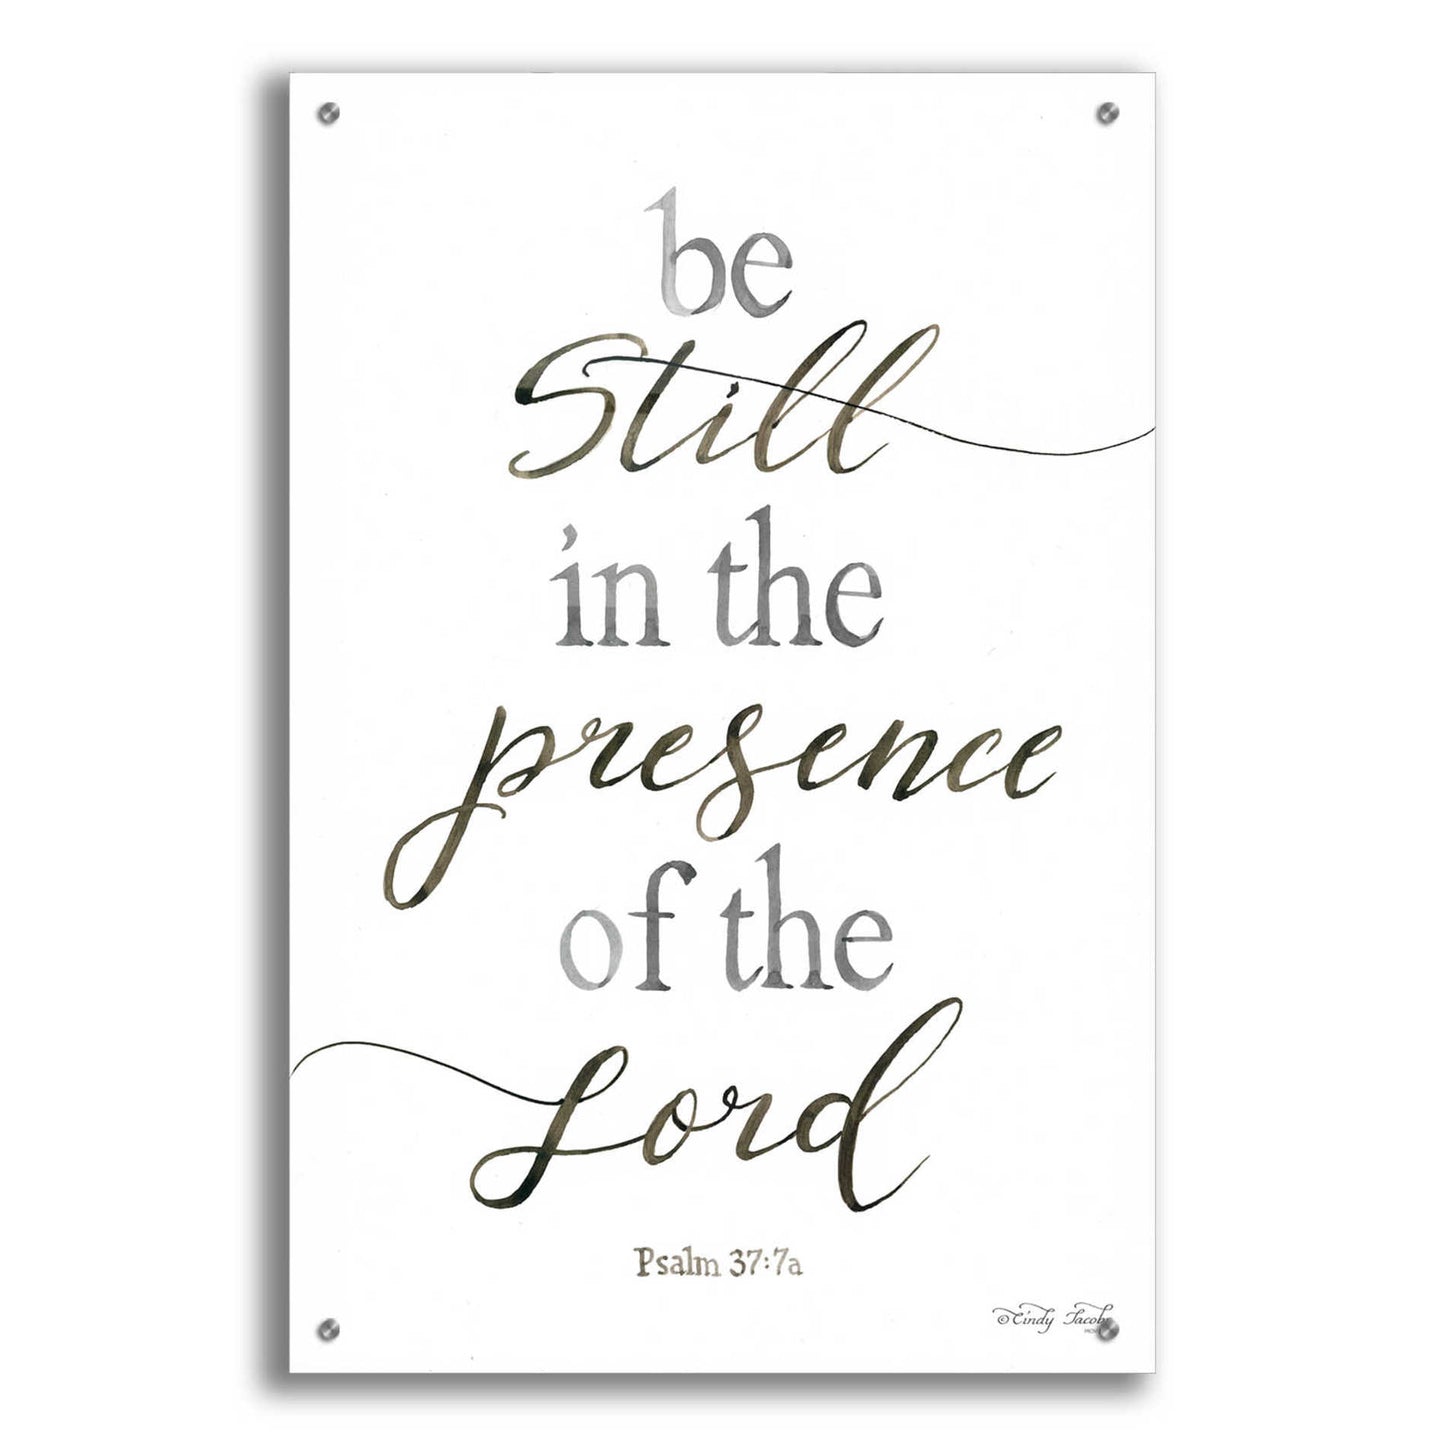 Epic Art 'Be Still in the Presence of the Lord' by Cindy Jacobs, Acrylic Glass Wall Art,24x36